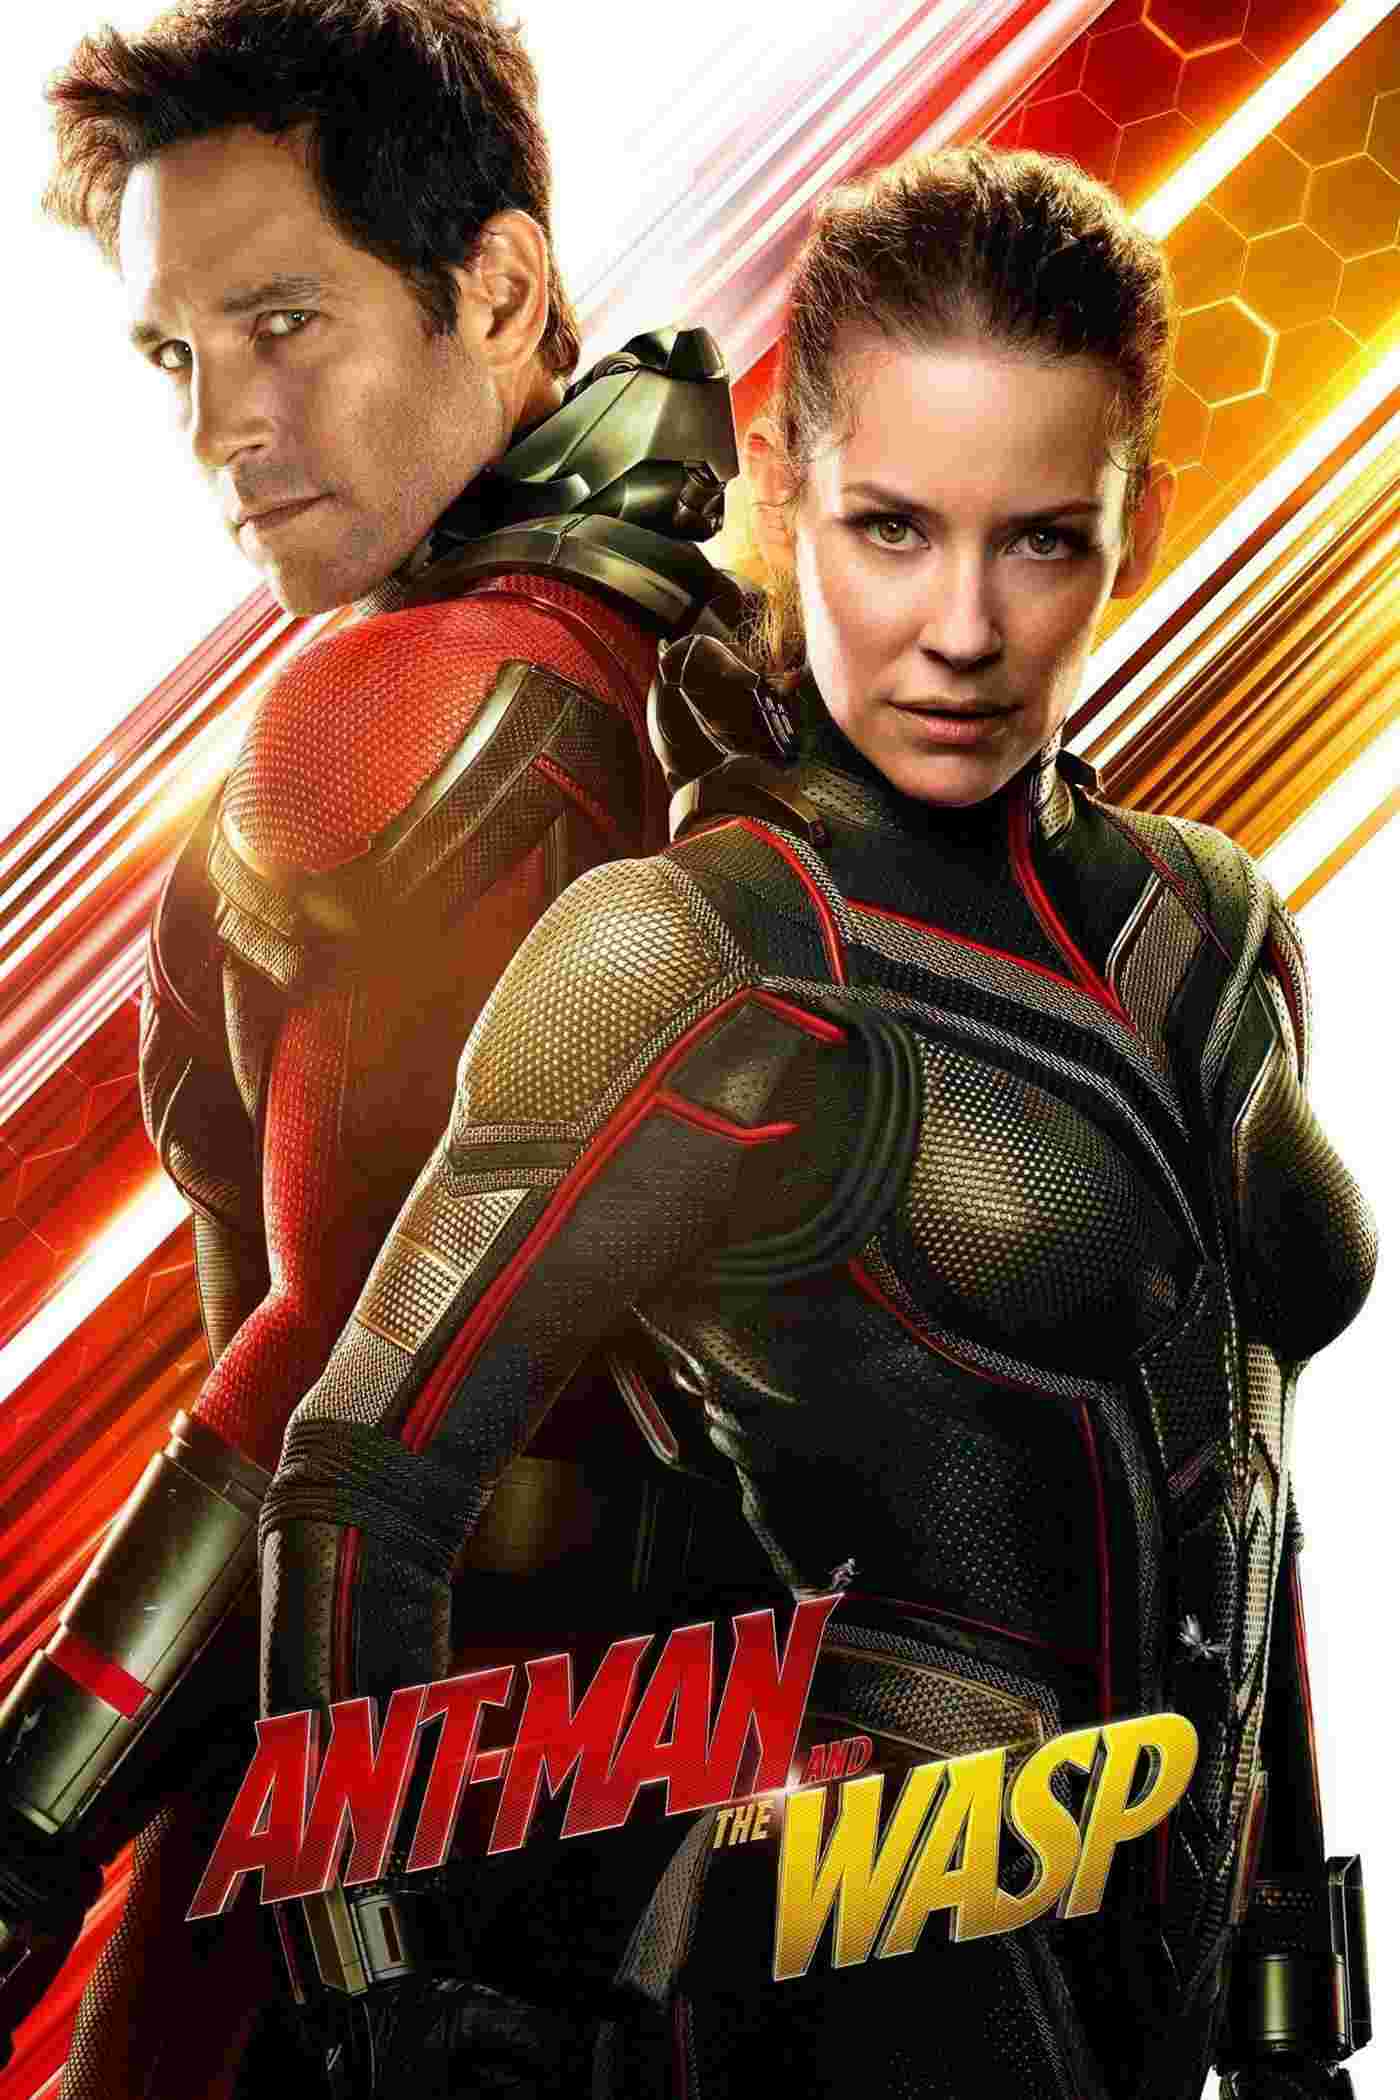 Ant-Man and the Wasp (2018) Paul Rudd